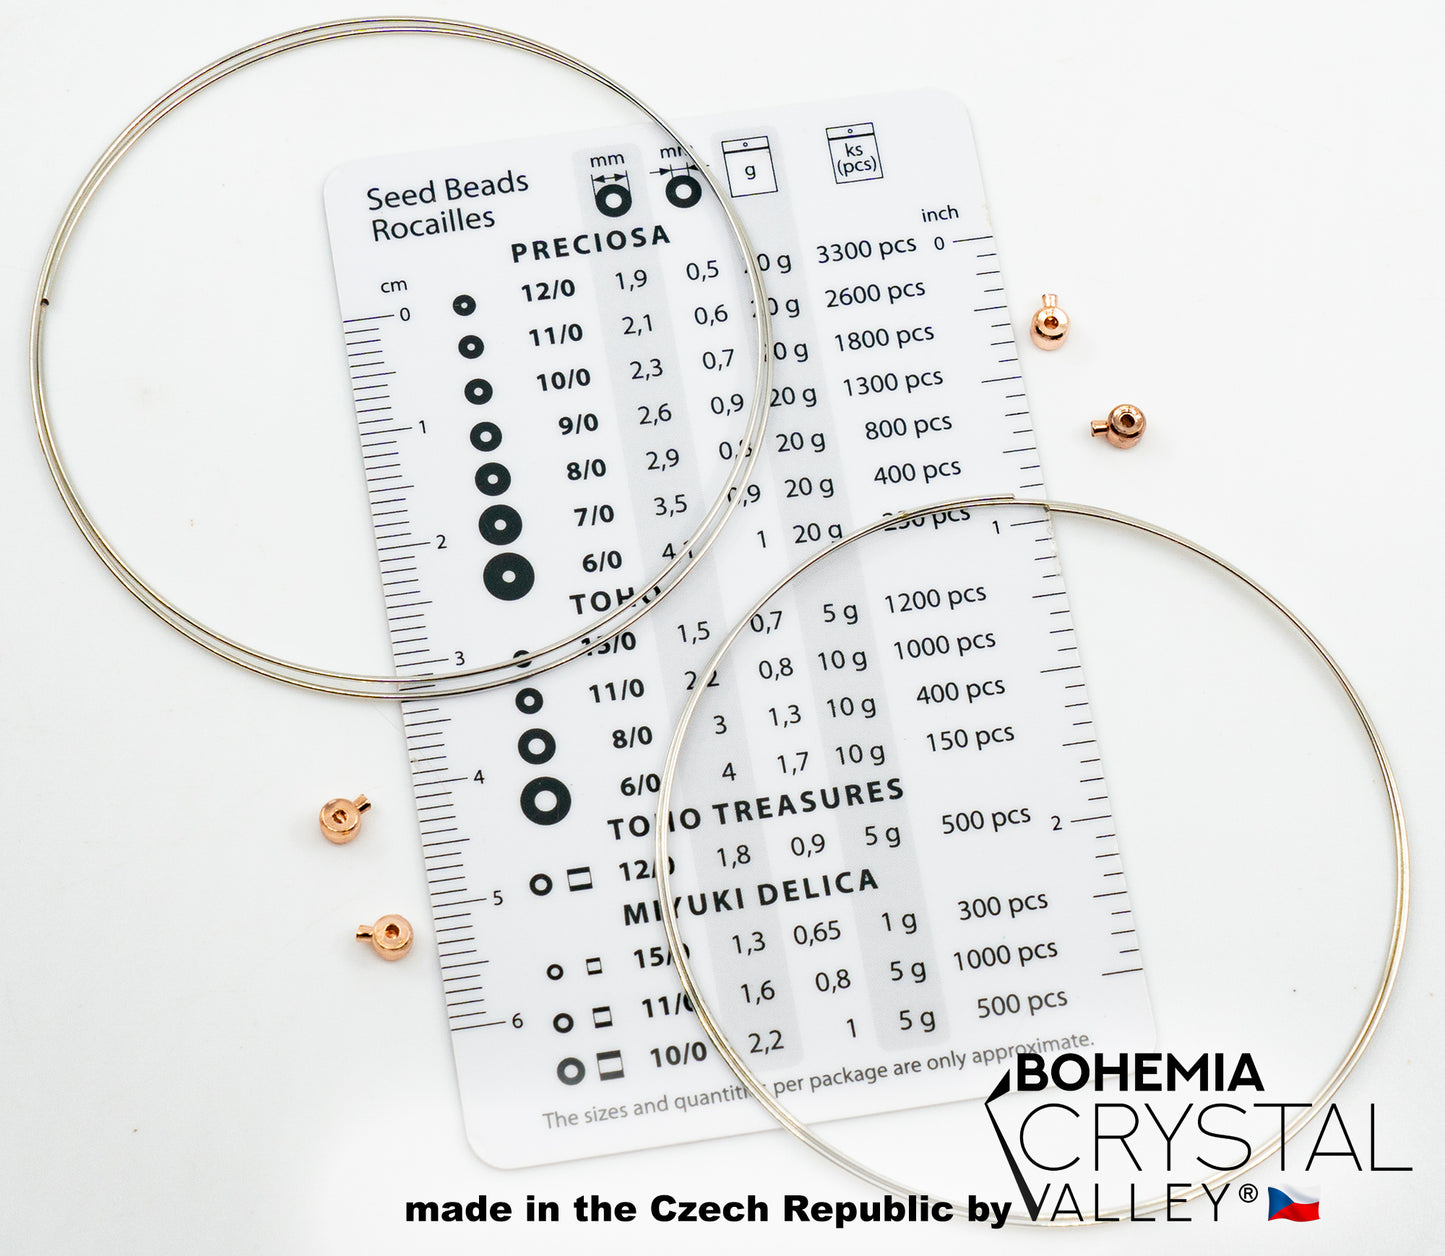 Bracelet making kit with Czech Glass Beads, 2pc Memory wire and crimps for beginners - easy & fast to do (Brown Coffee)